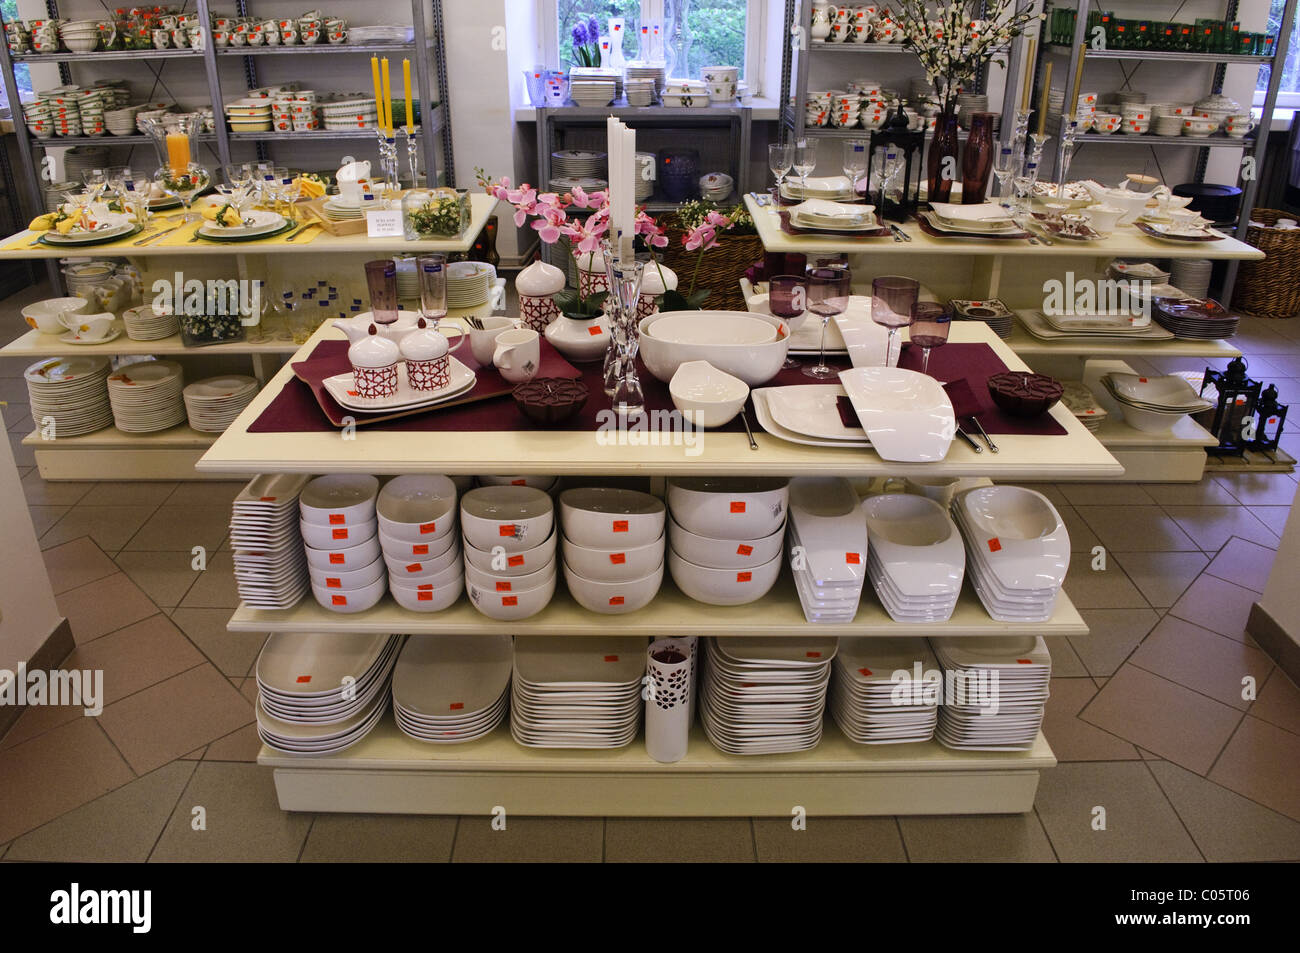 Villeroy & Boch china shop factory outlet at Wadgassen, Germany Stock Photo  - Alamy